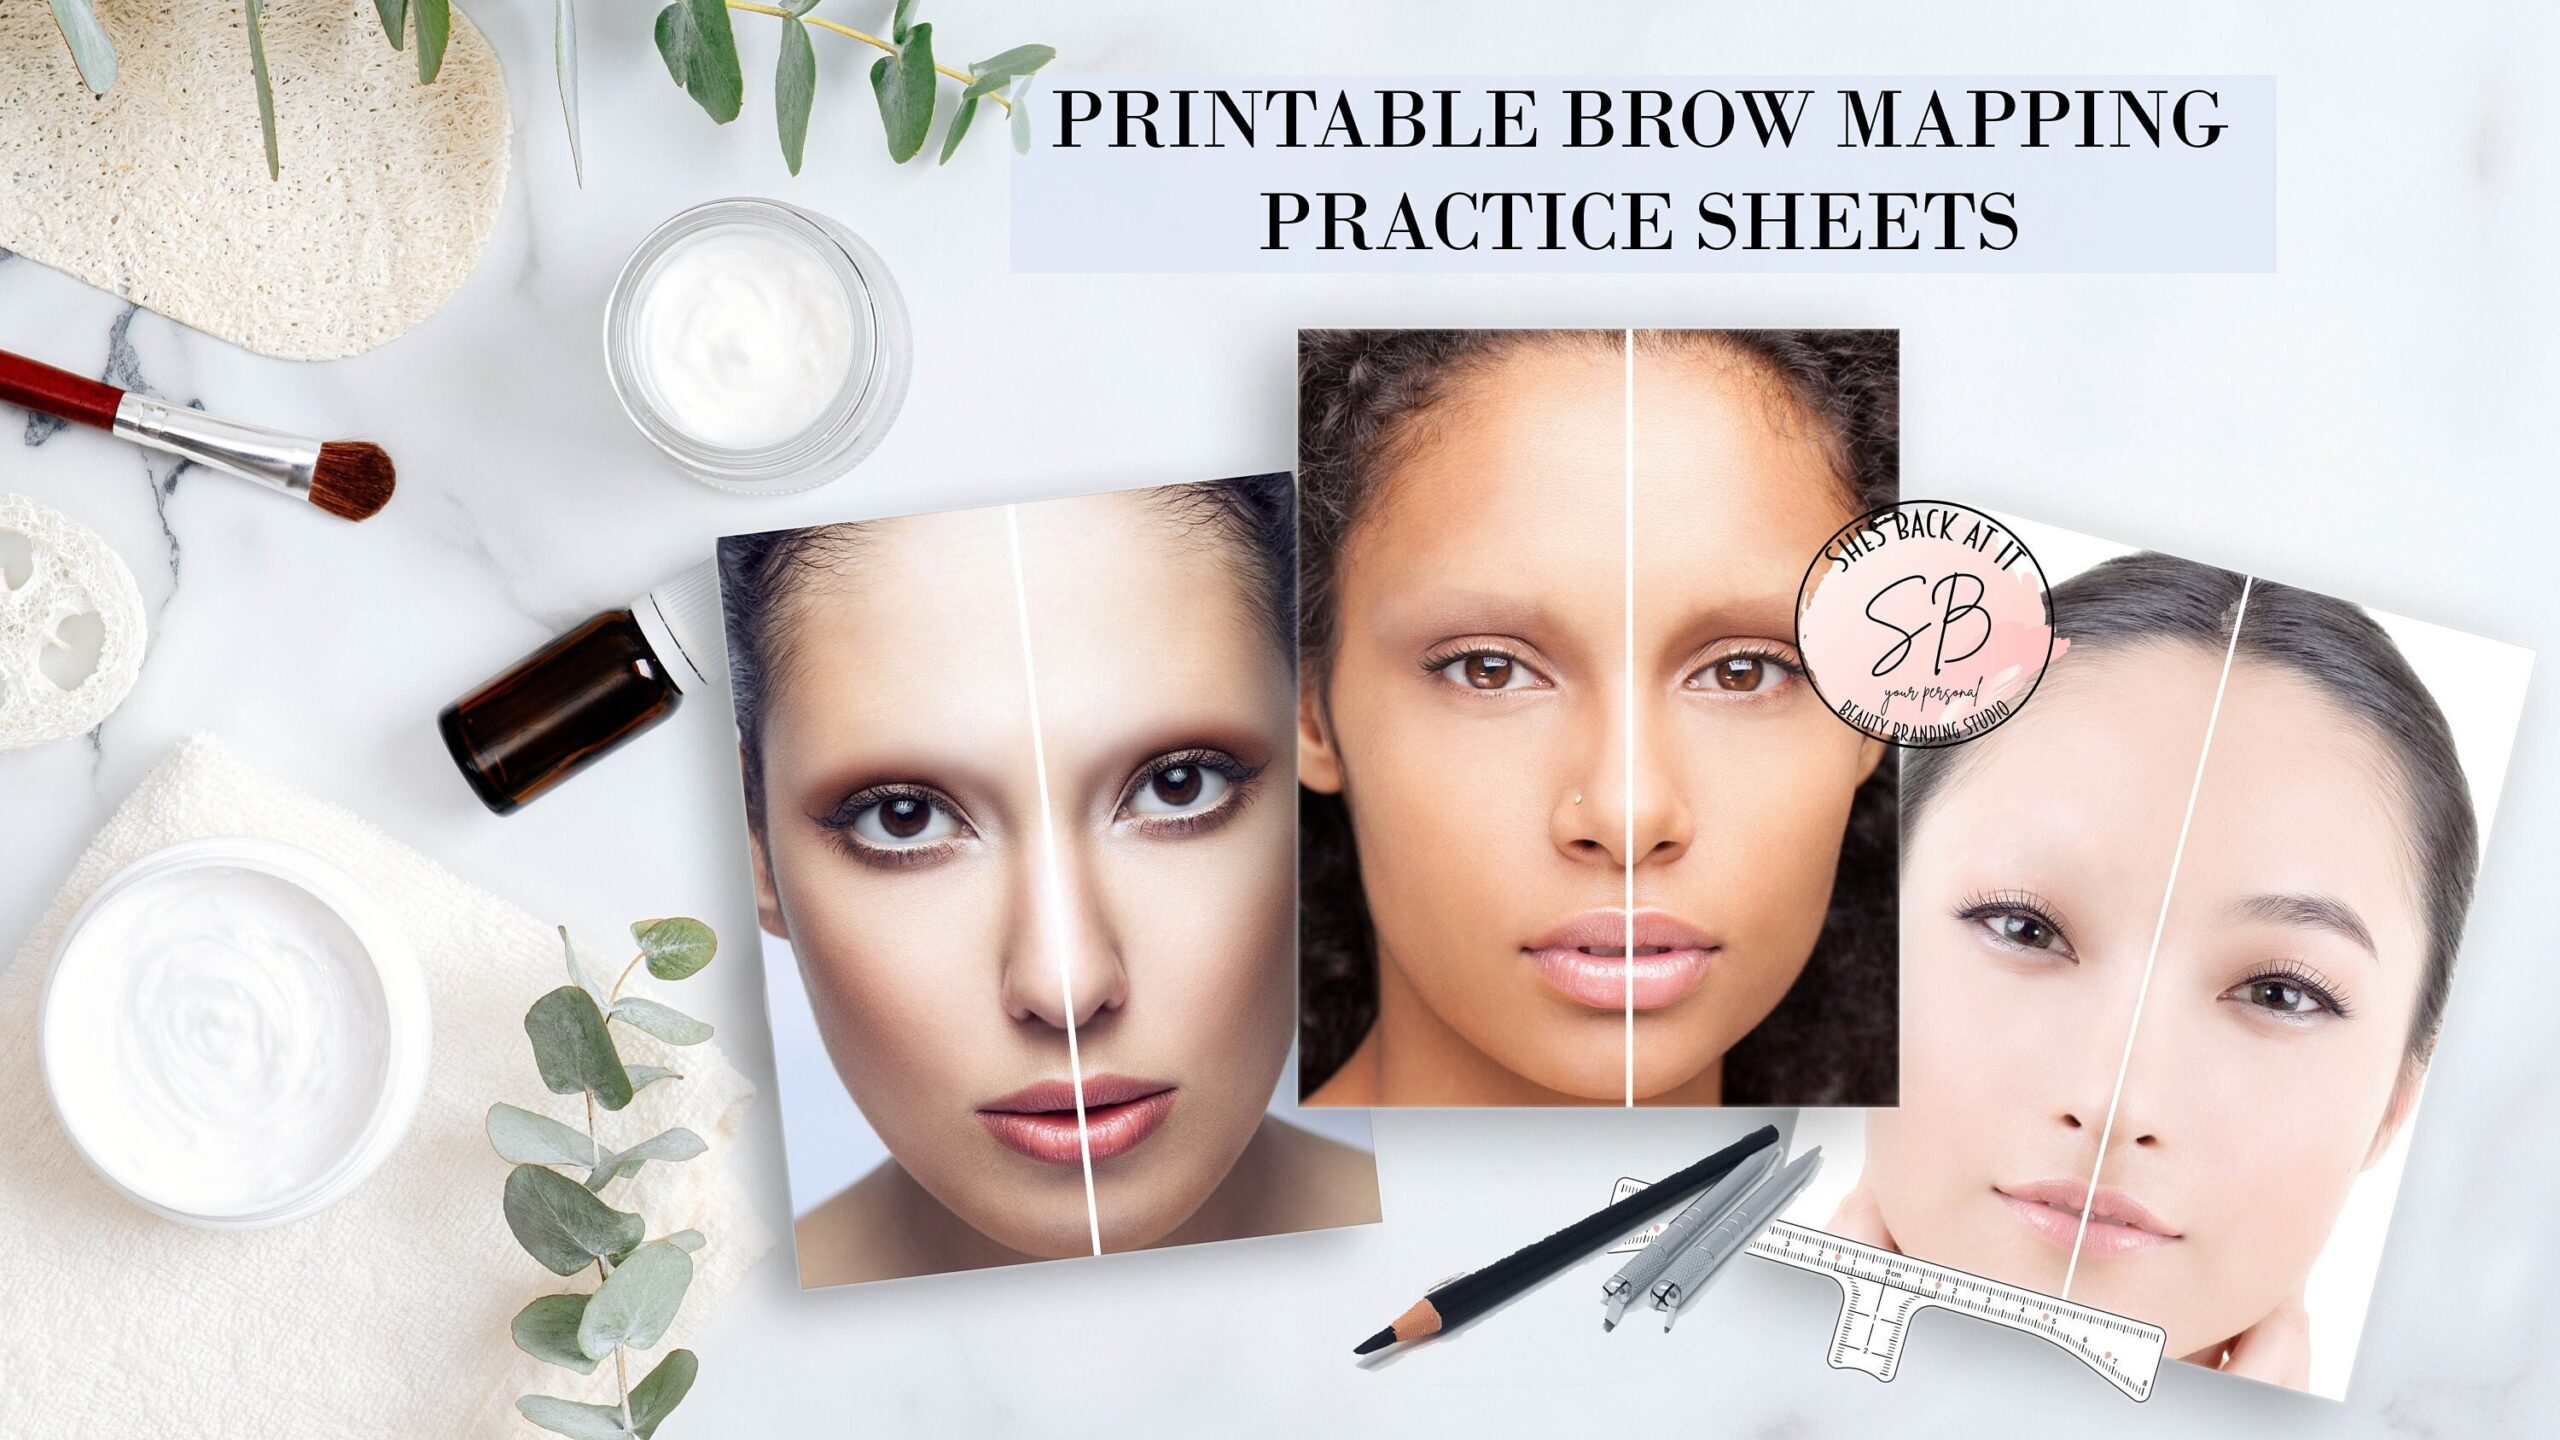 Printable Brow Mapping Practice Sheets